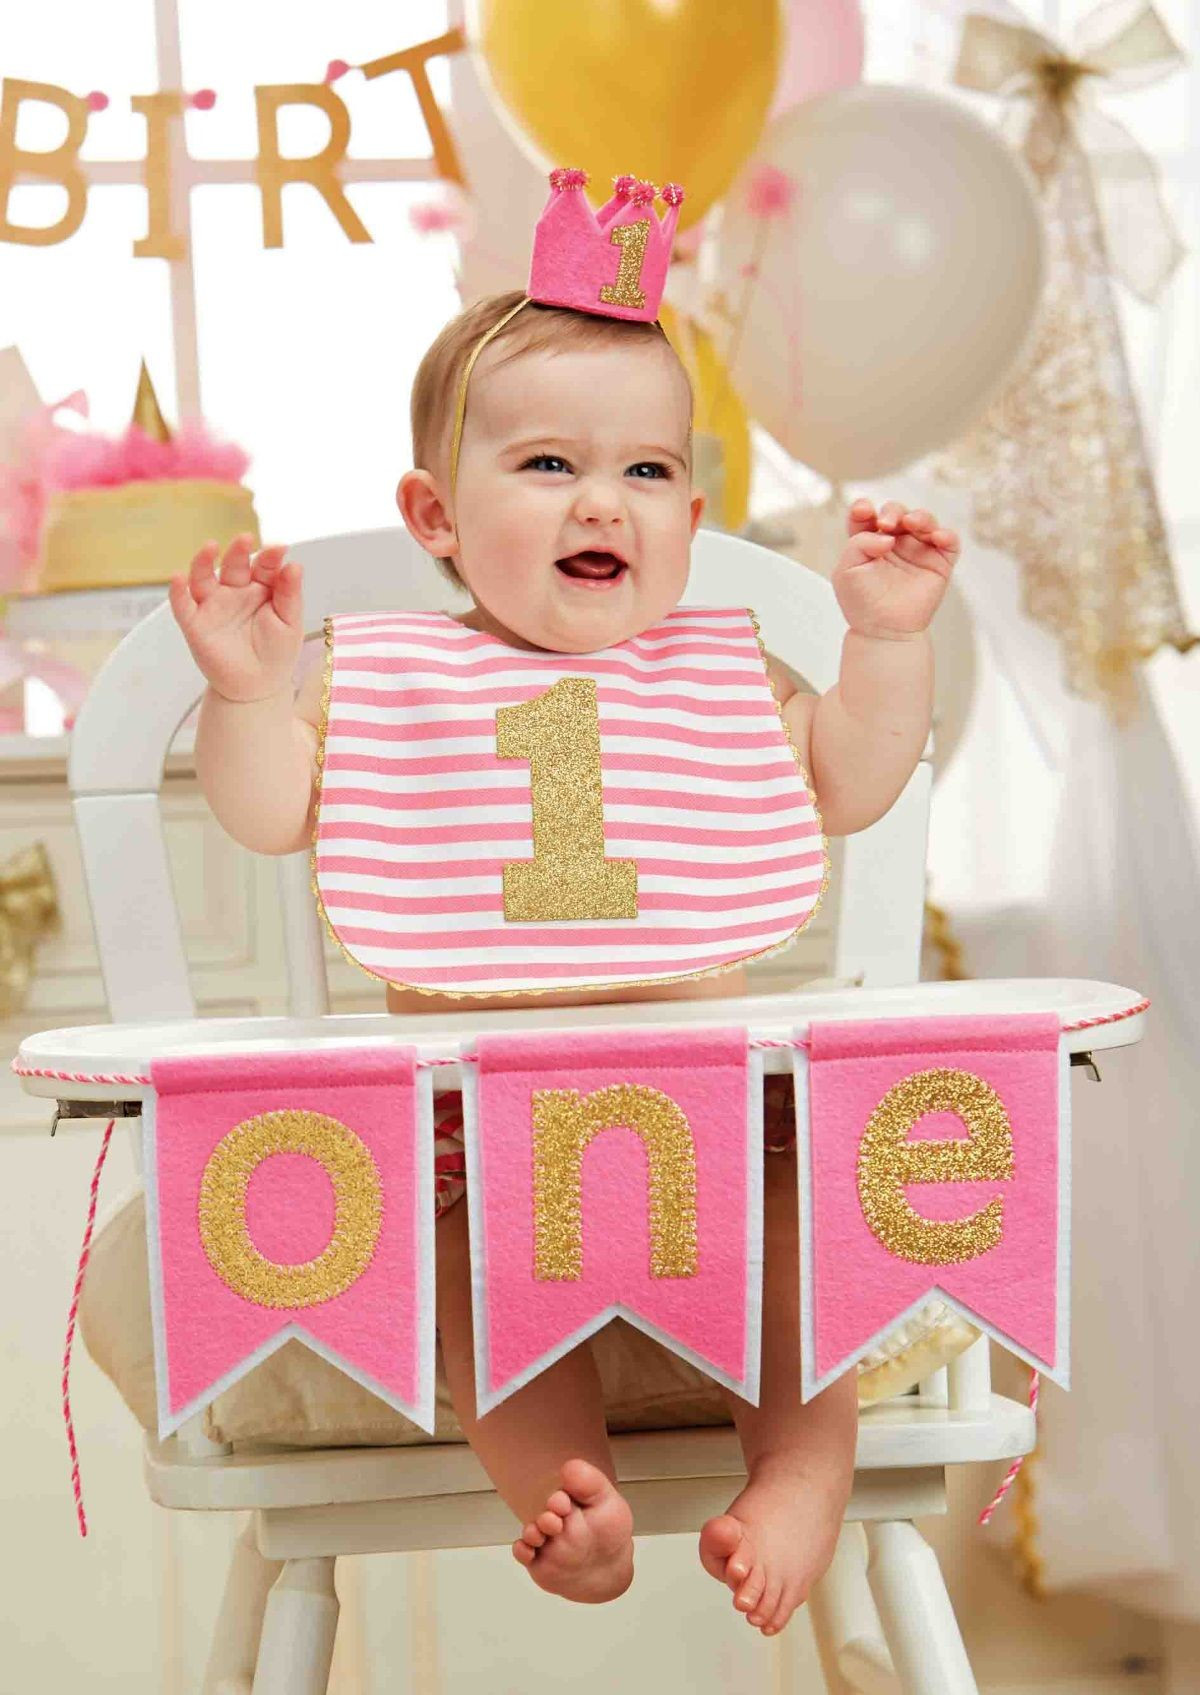 Baby'S First Birthday Gift Ideas For Her
 Decorate baby s high chair for her big first birthday with